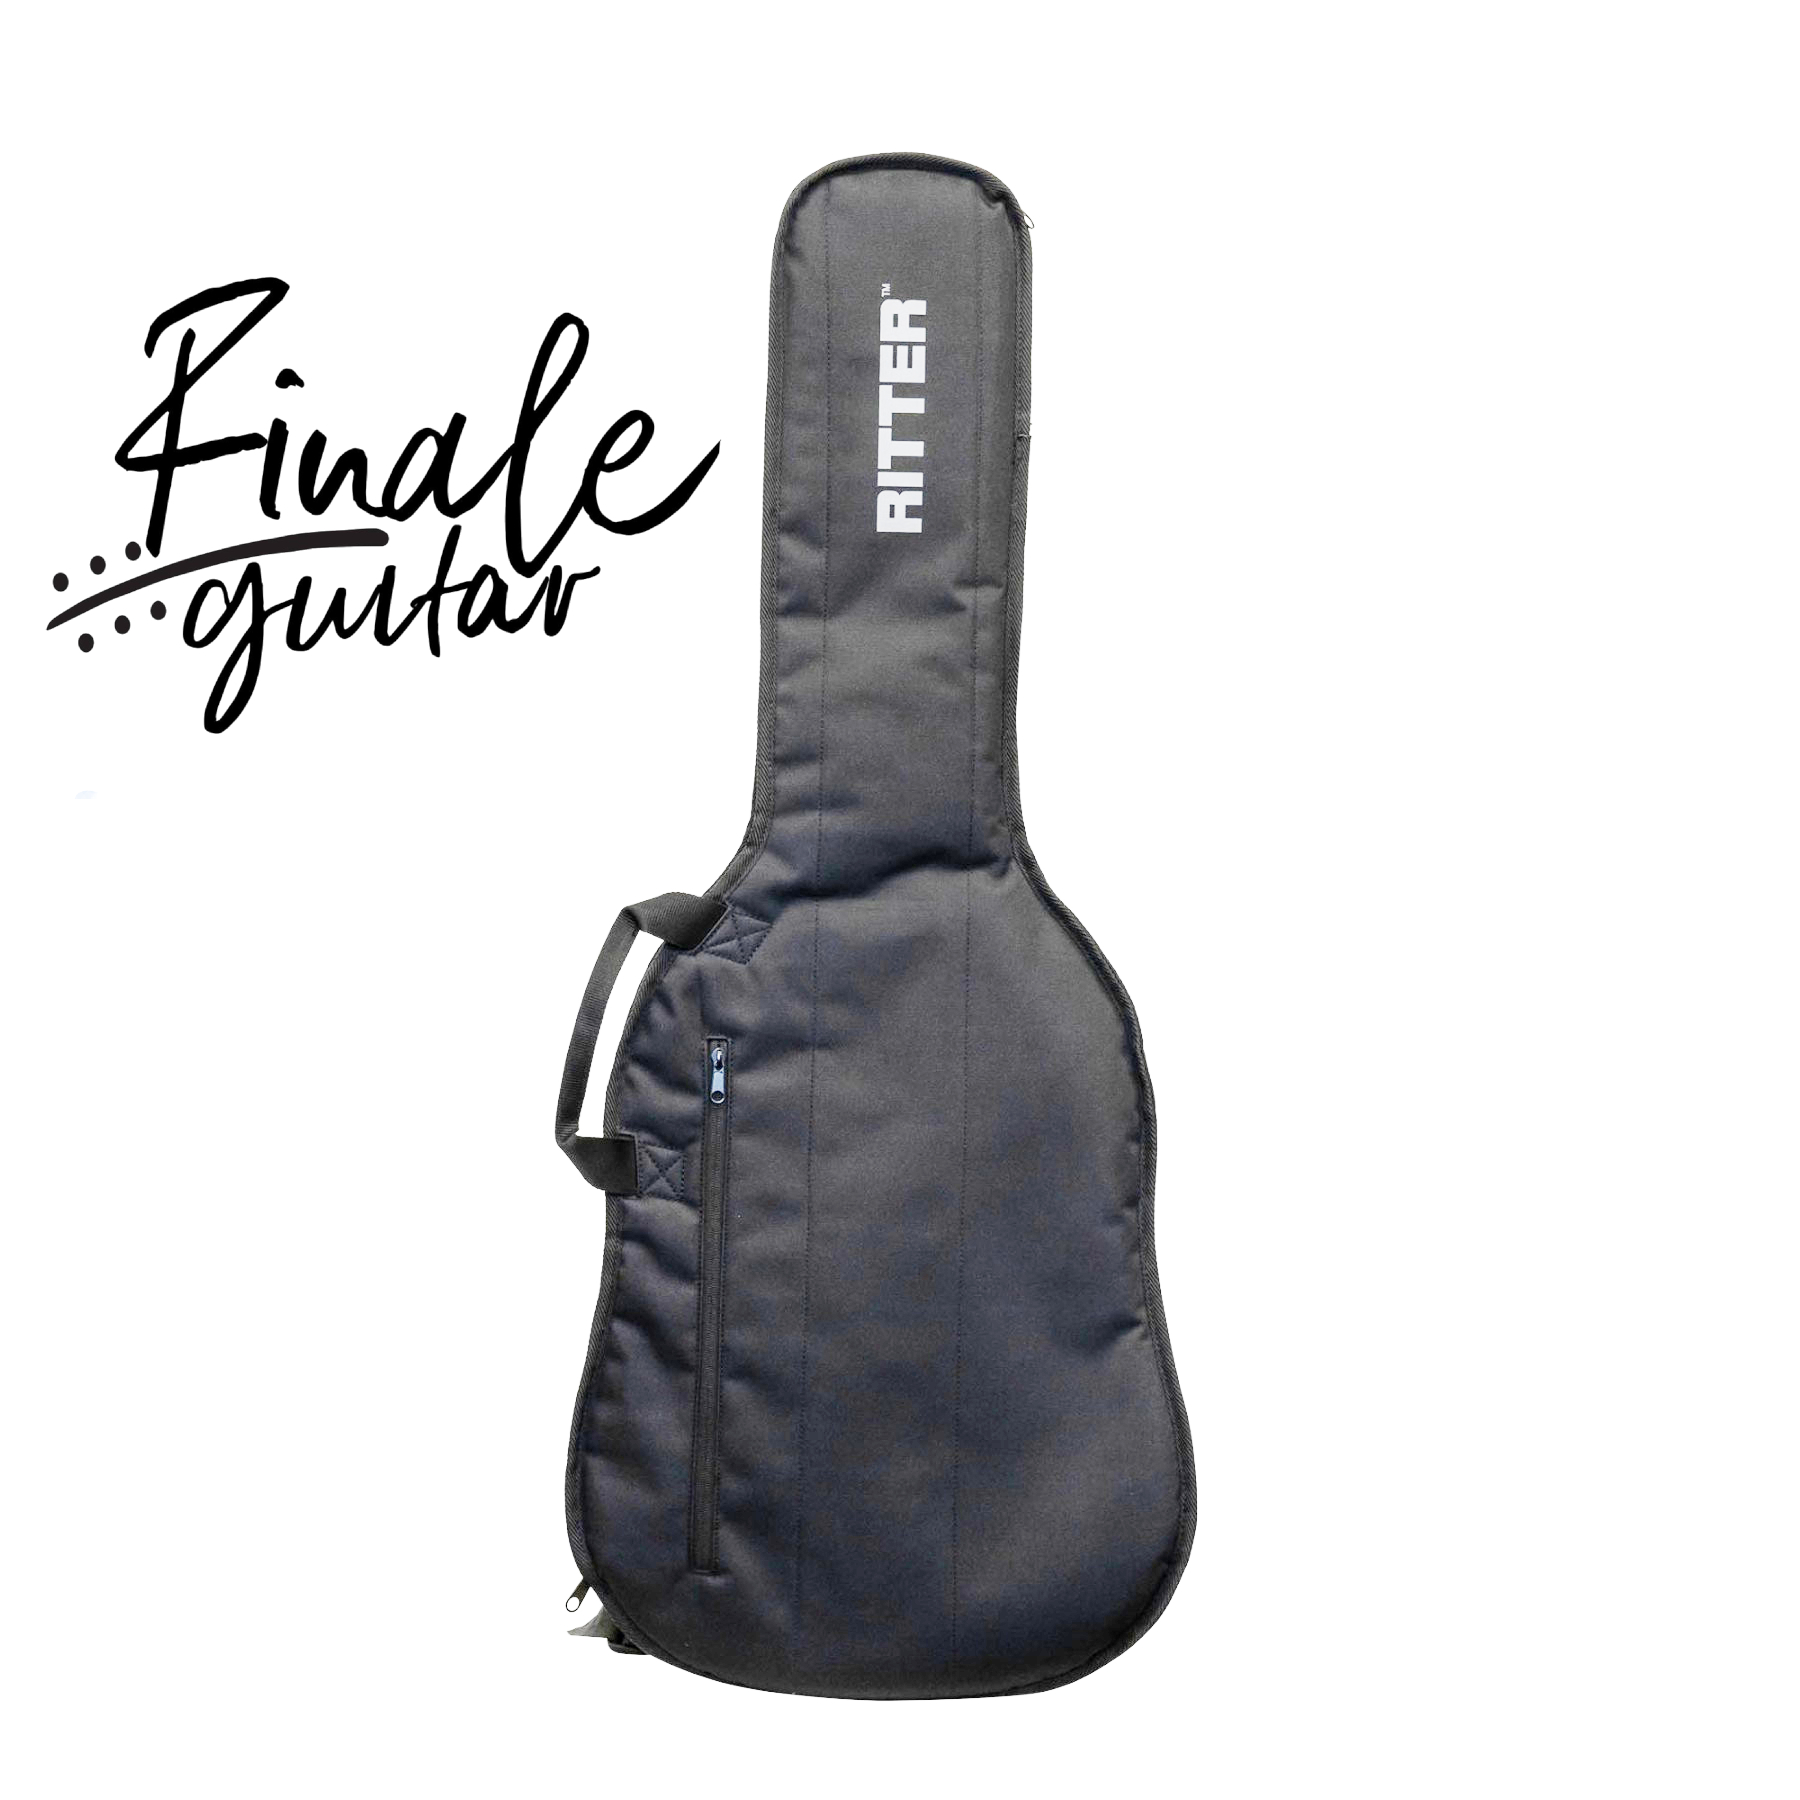 Ritter electric guitar gig bag for sale in our Sheffield guitar shop